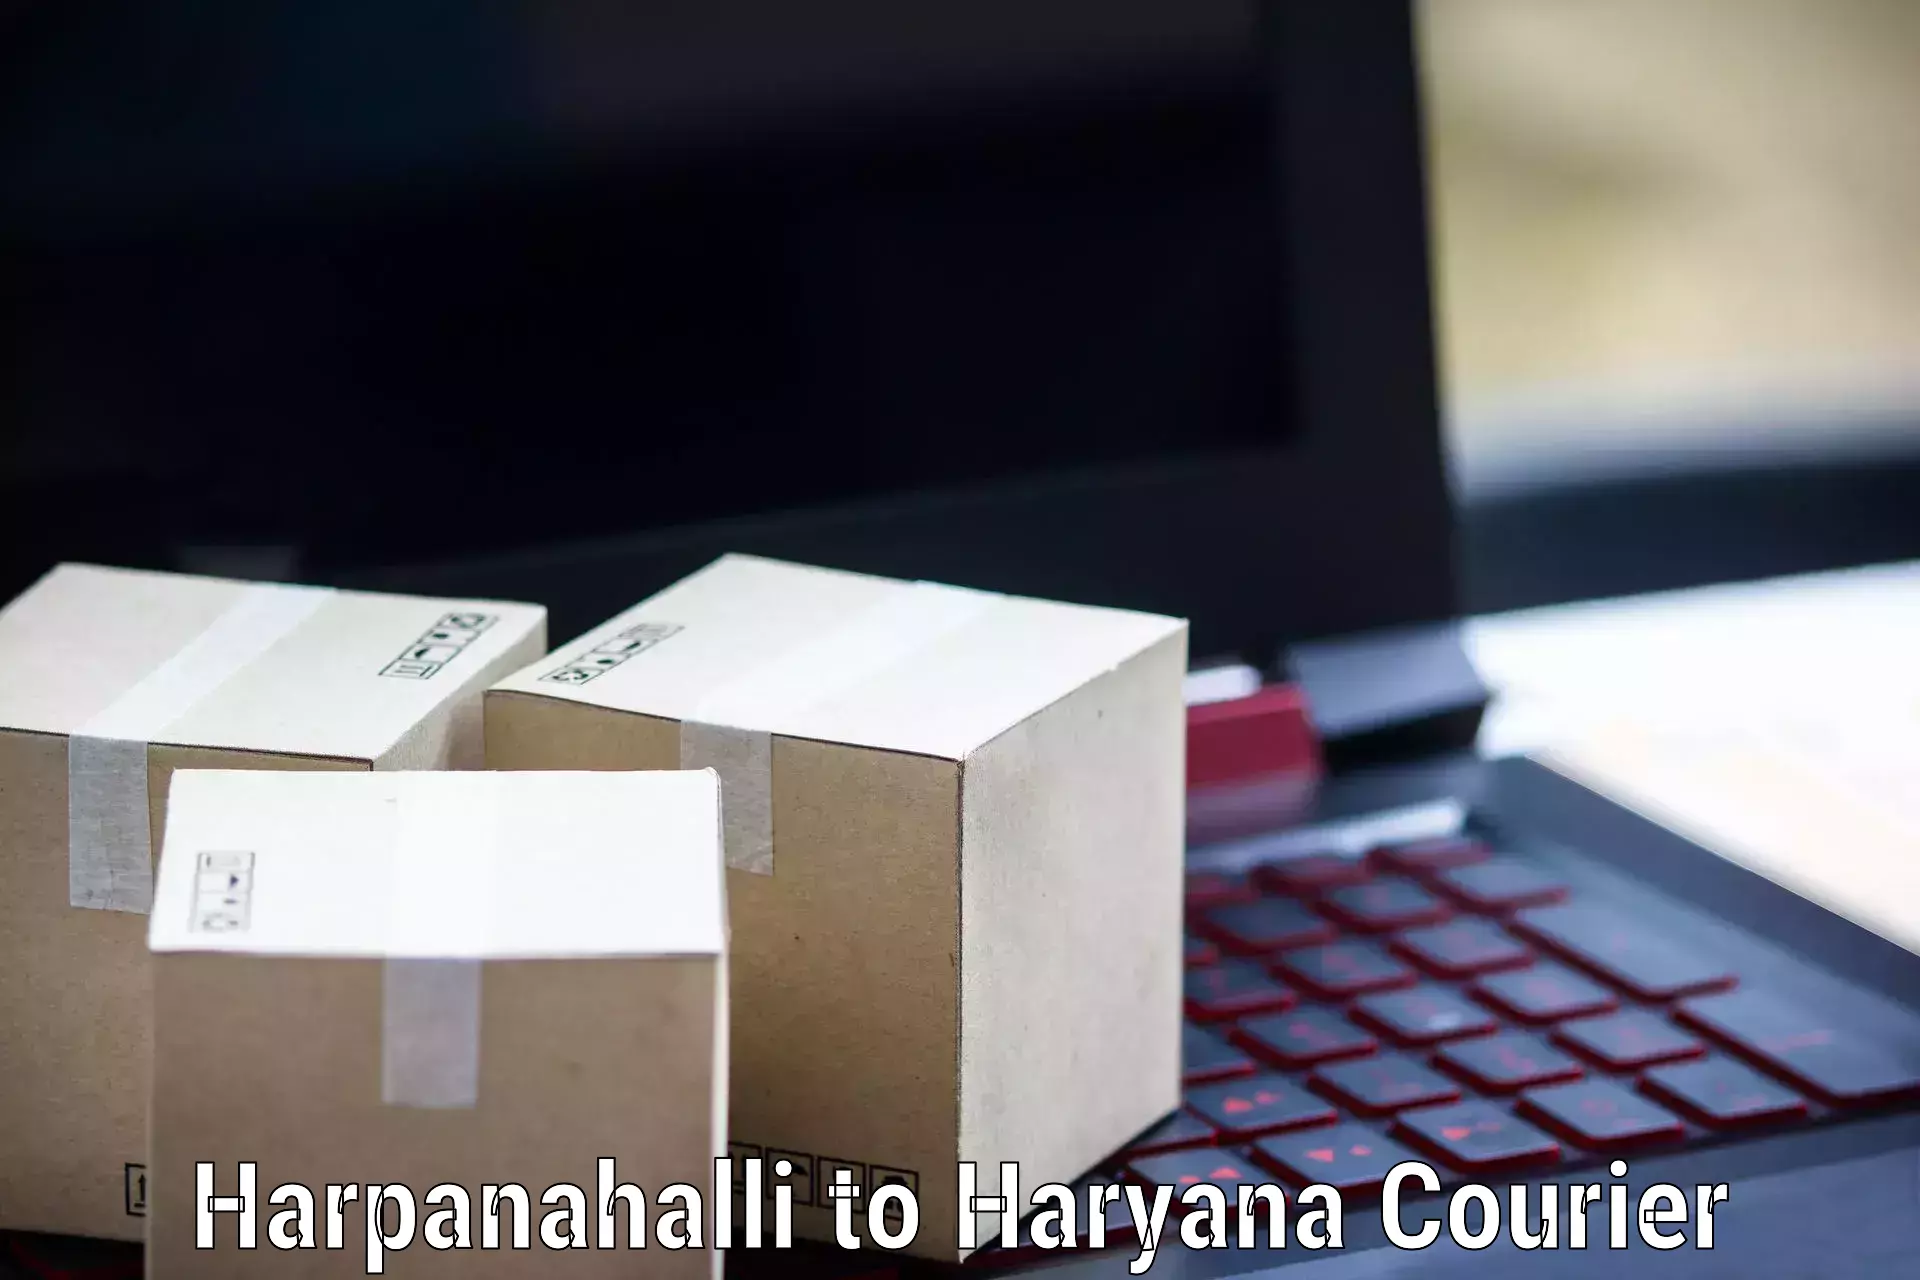 Express delivery network Harpanahalli to NCR Haryana